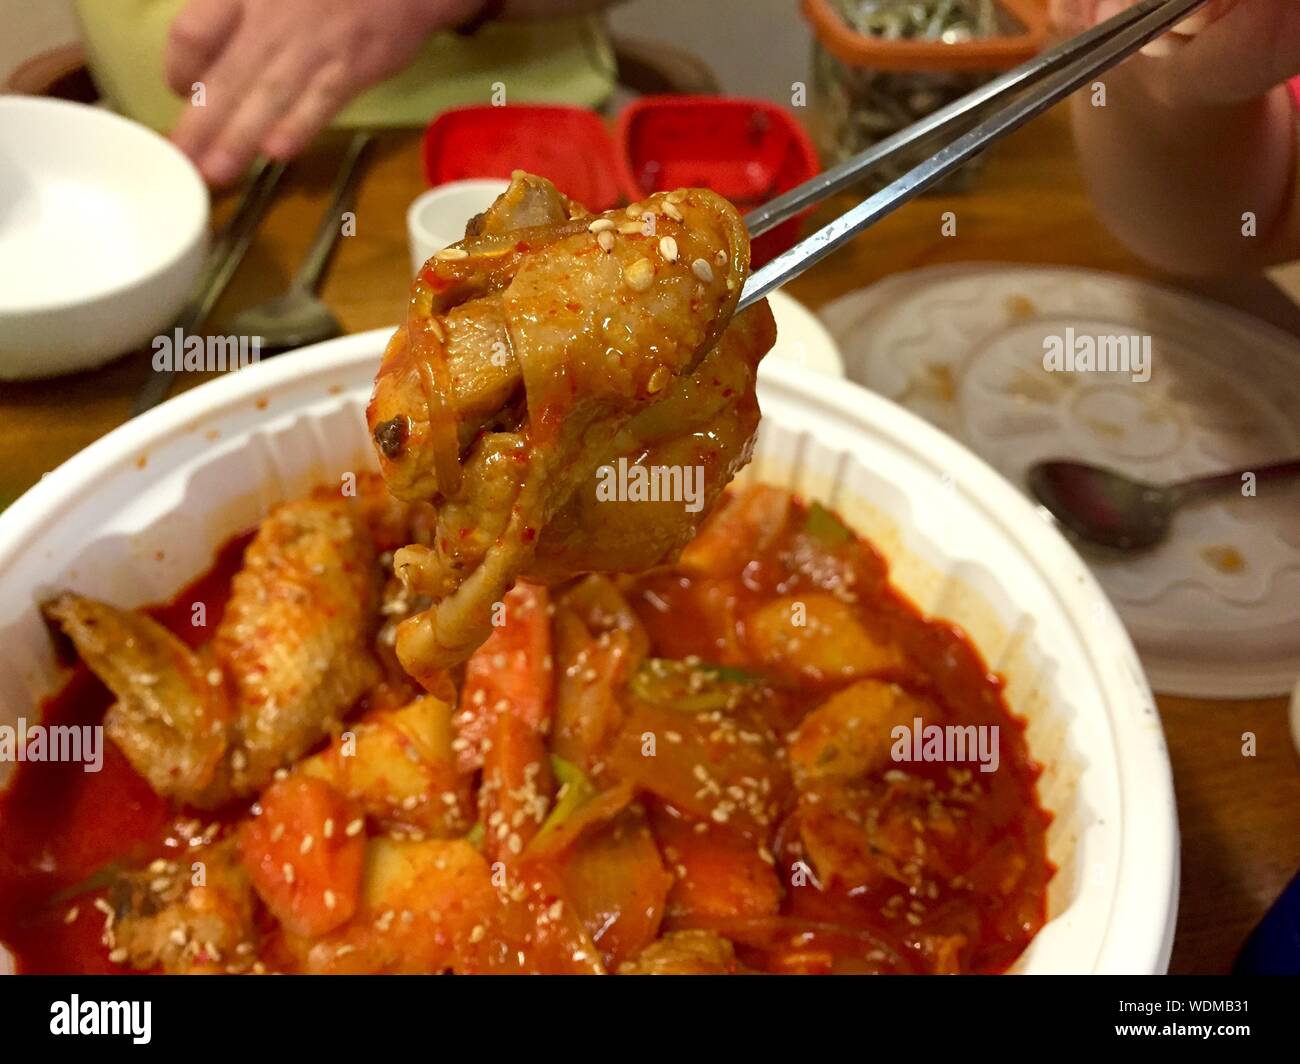 Close-up Of Fresh Homemade Spicy Food In Bowl On Table Stock Photo